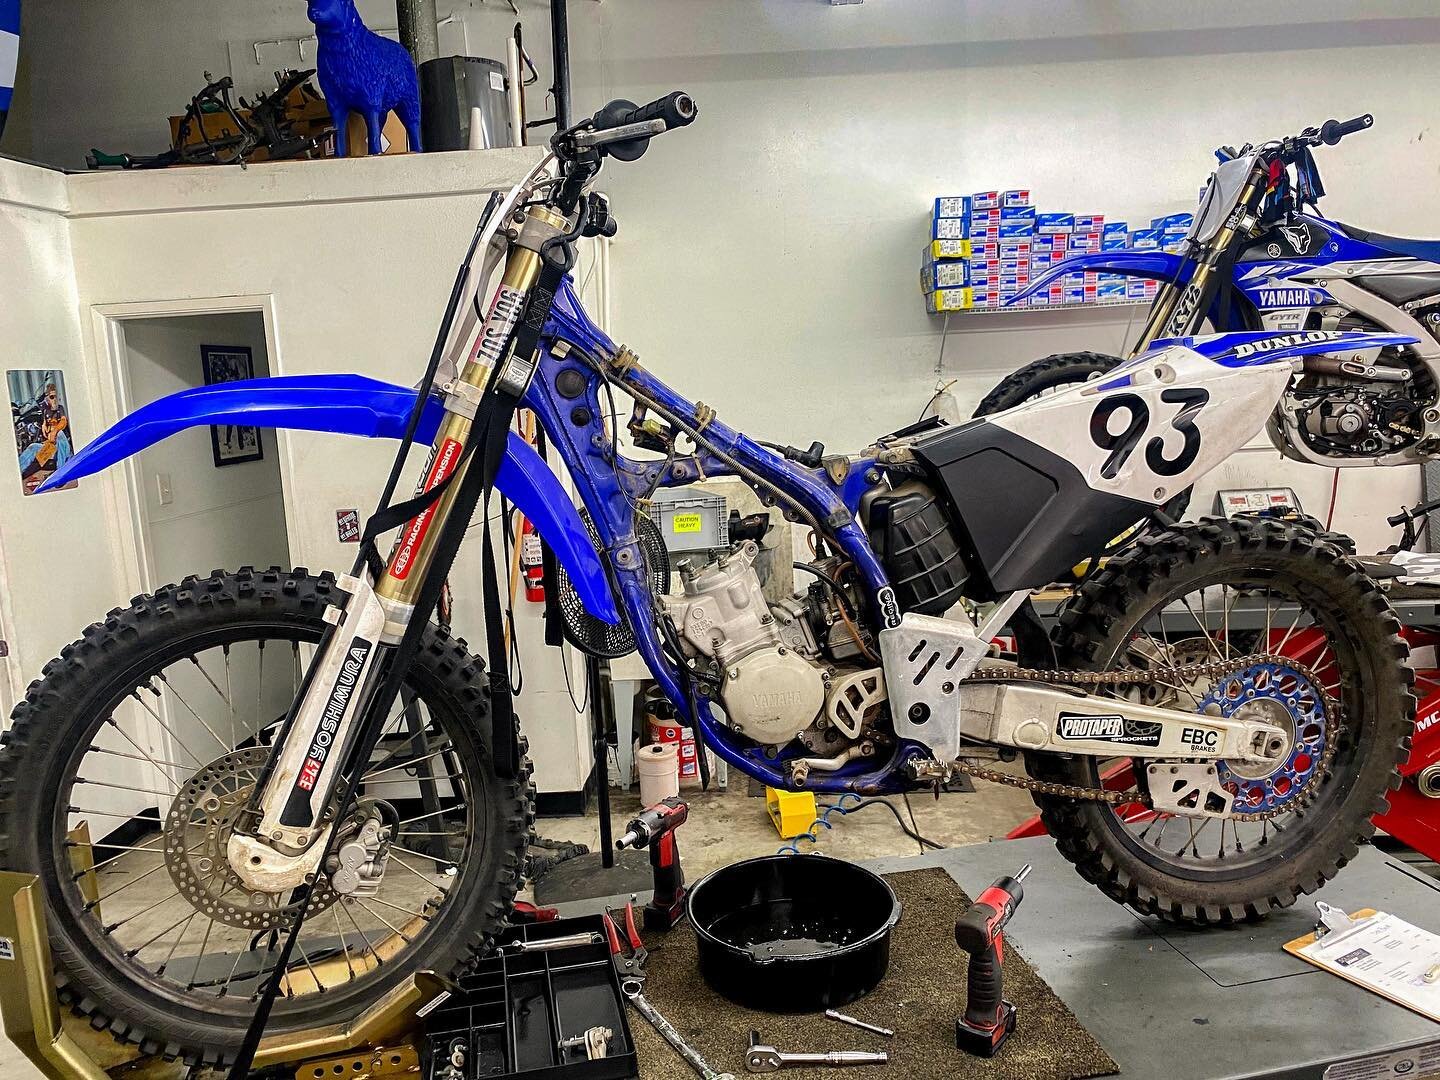 Sometimes you just have to start from scratch. Check out this teardown of a YZ 125. 
.
Need a rebuild? Give us a call today.